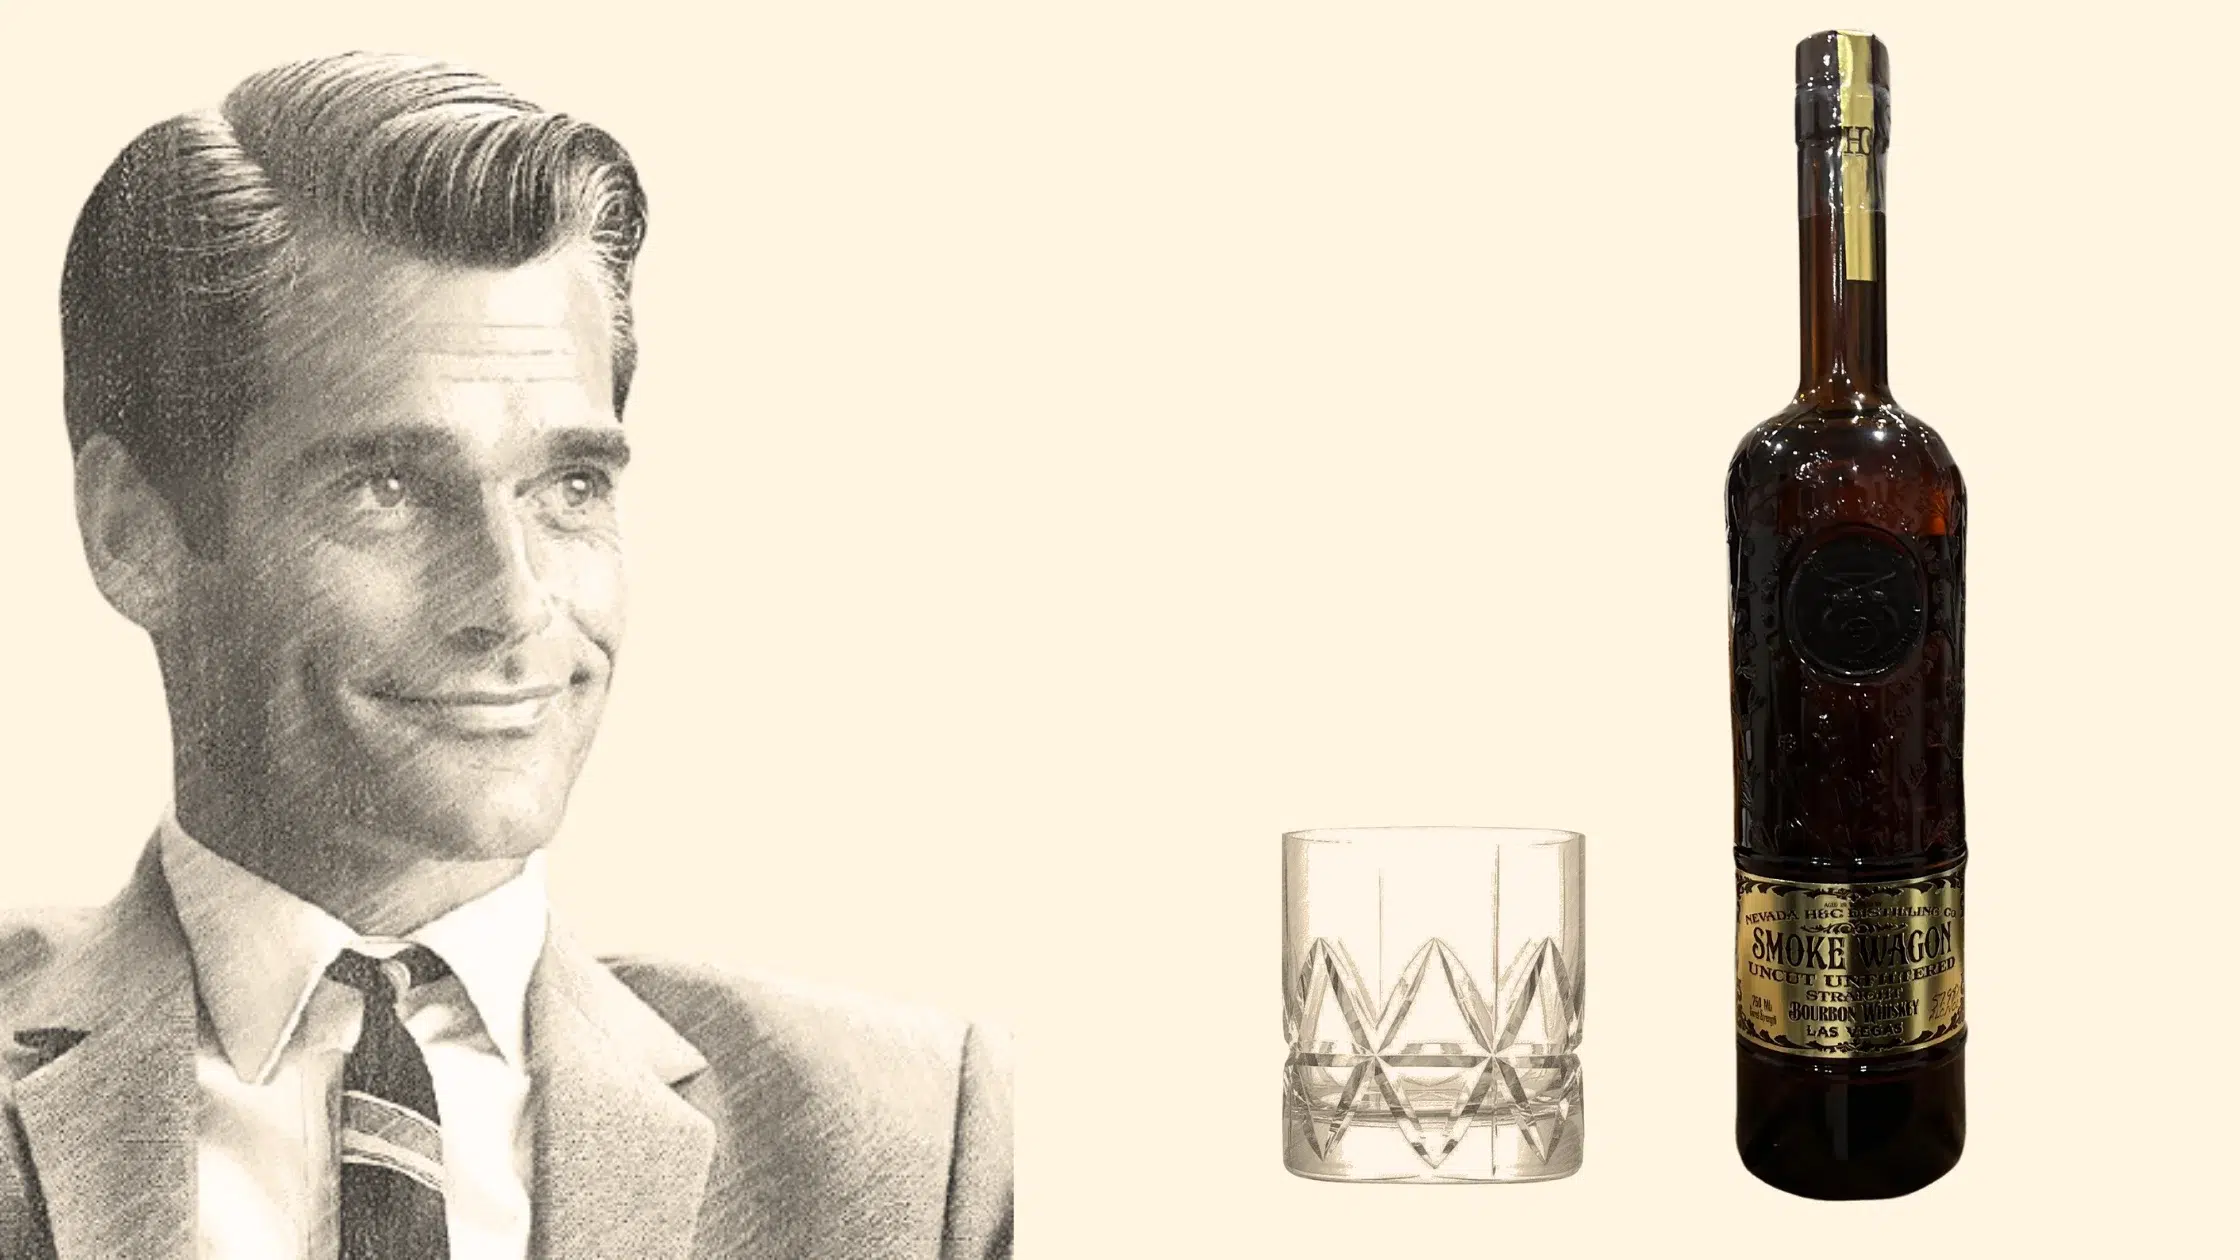 Vintage style man with whiskey bottle and glass.